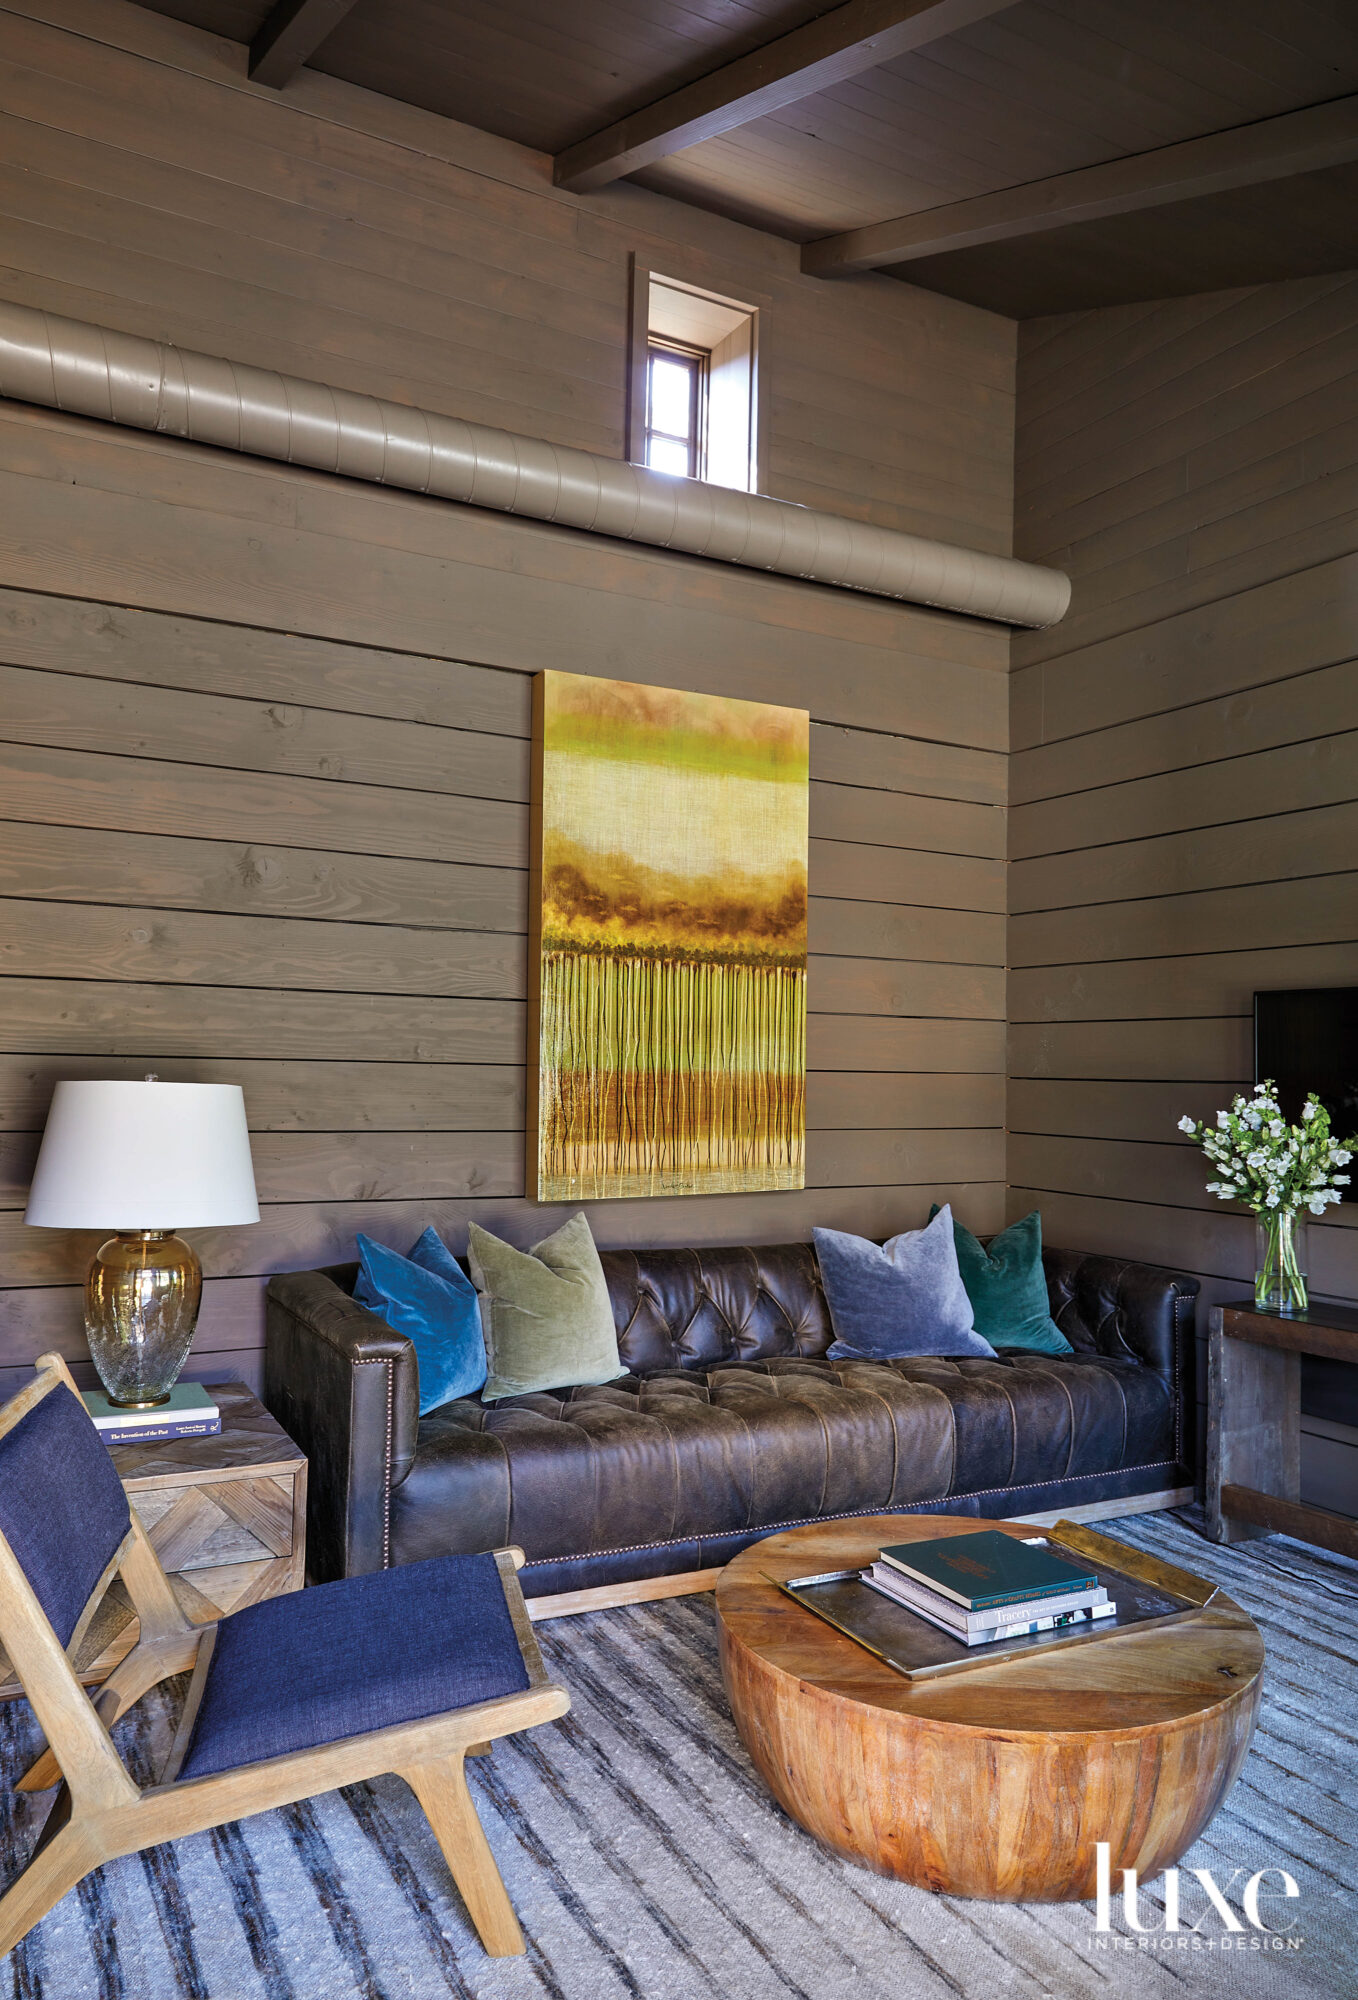 Cozy sitting room with horizontal wood paneling, tufted leather sofa and industrial drum coffee table